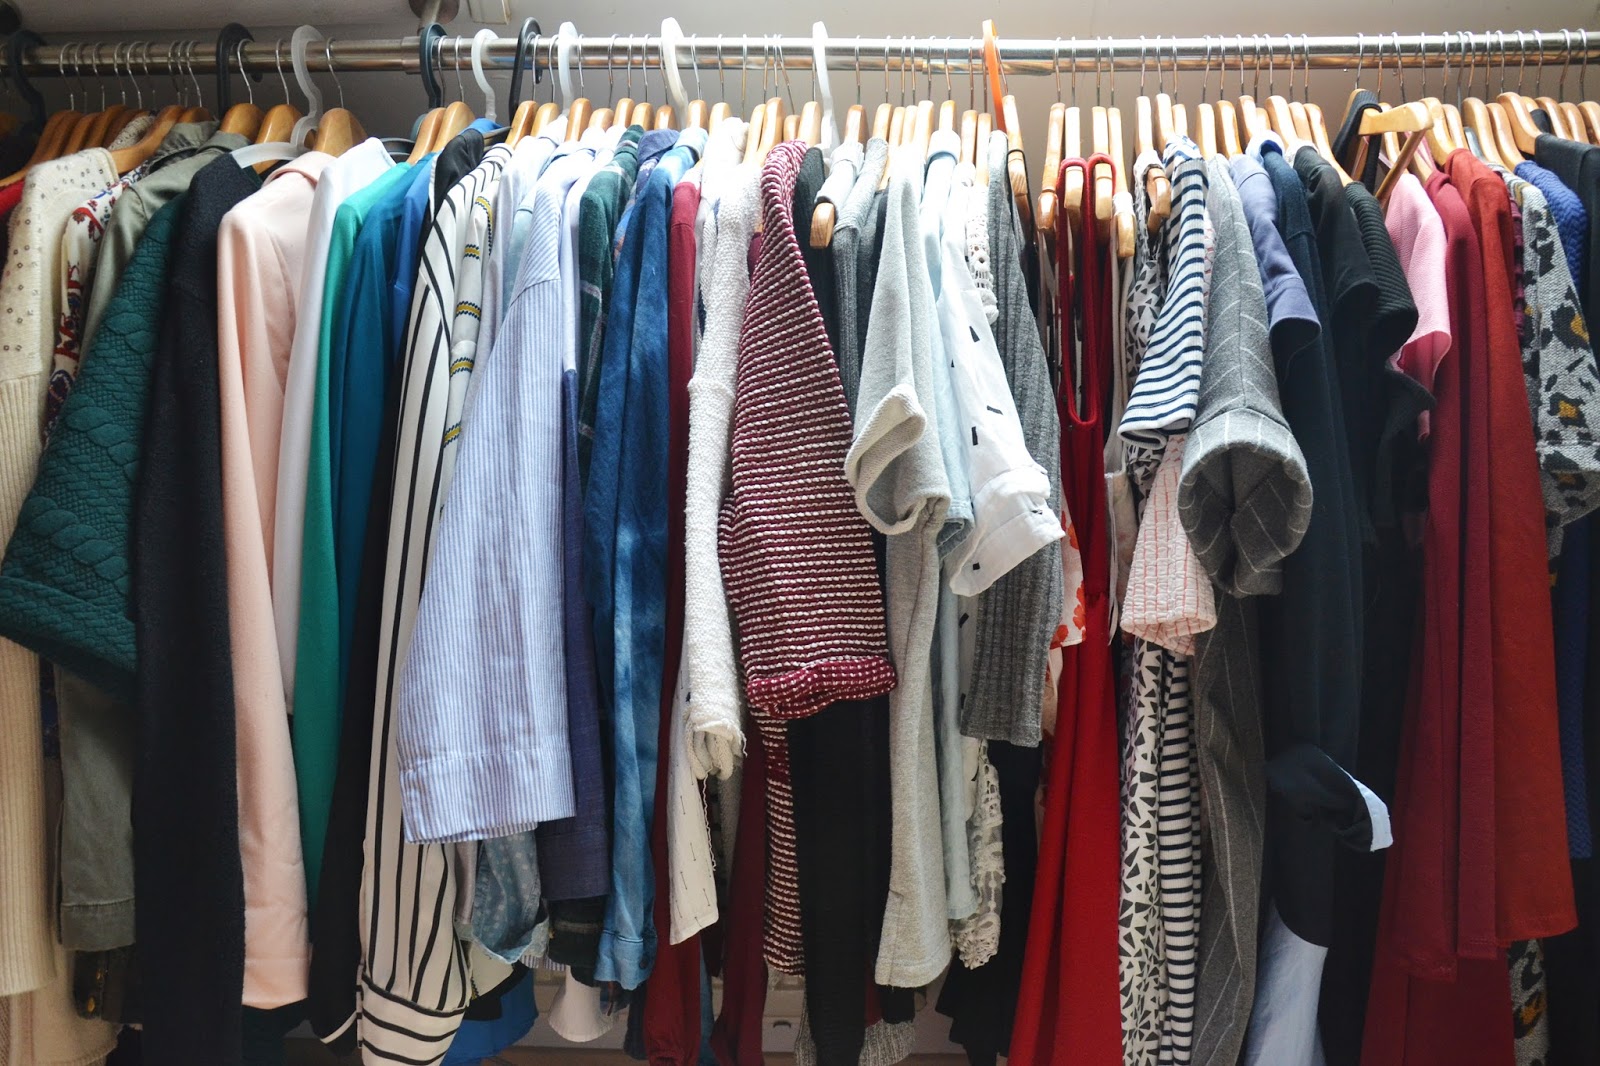 Closet confessions: Maxime’s colourful collection | Kathy Berk